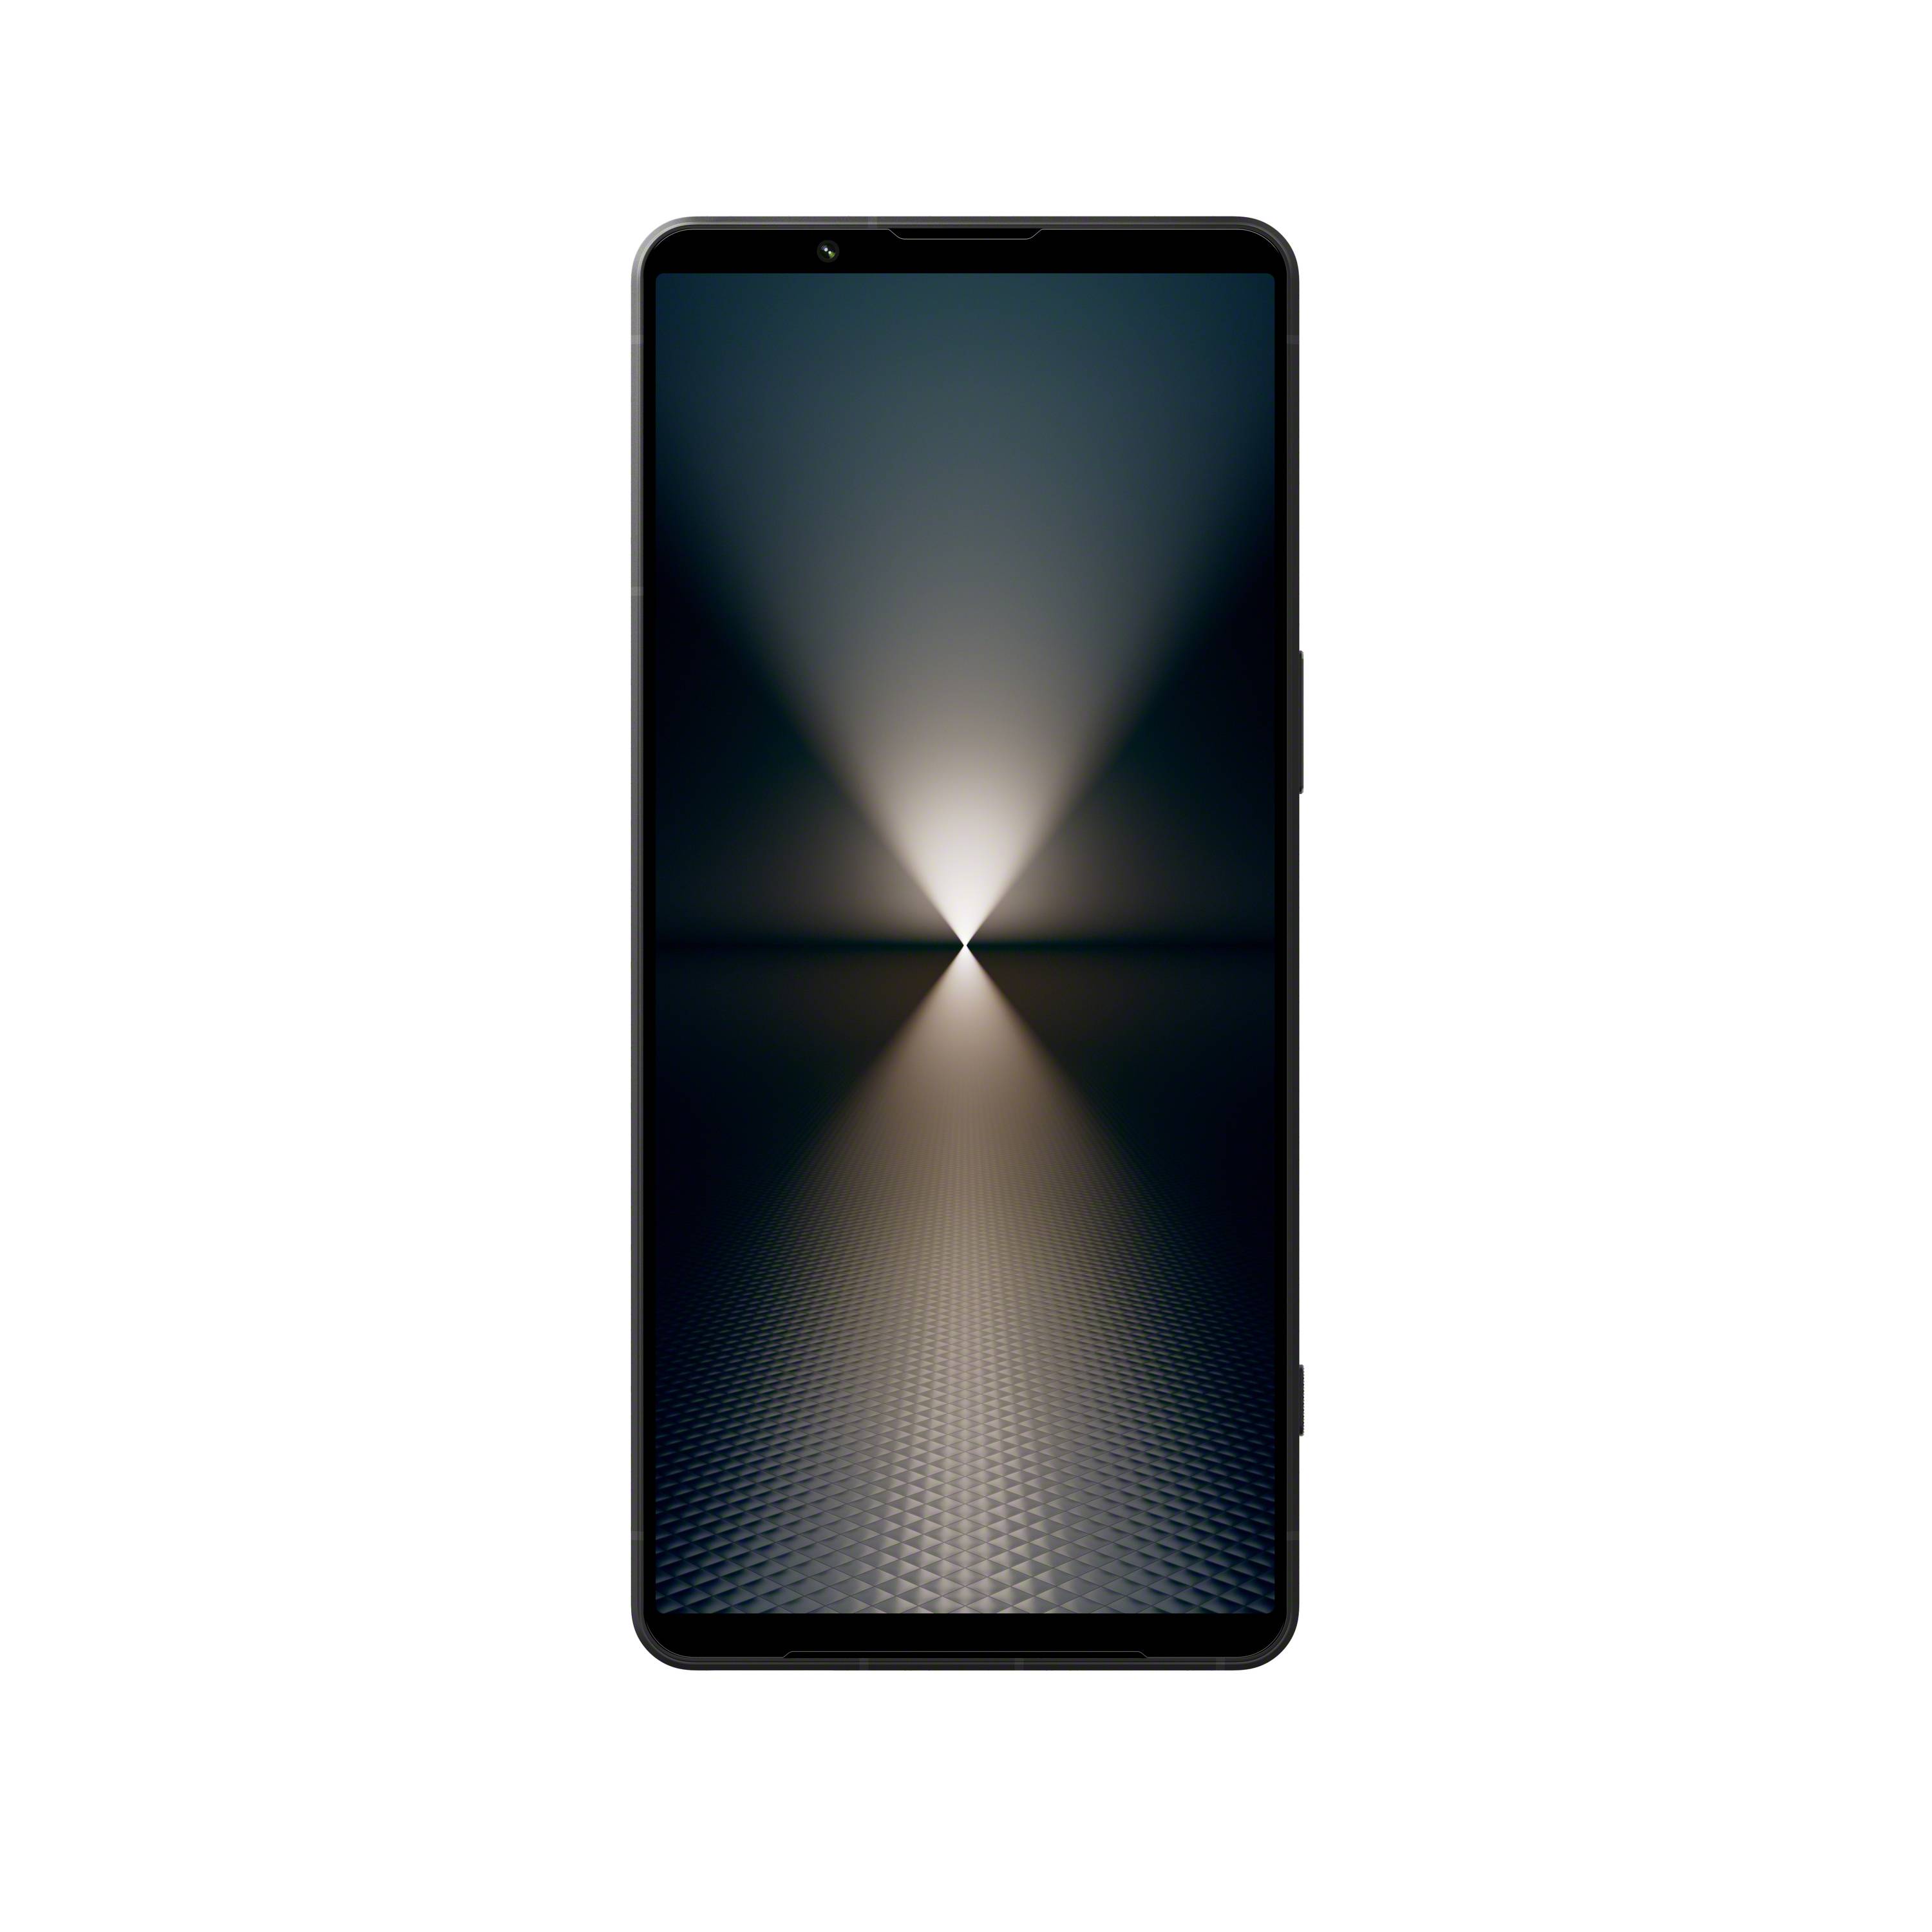 Sony Xperia 1 VI image number 2